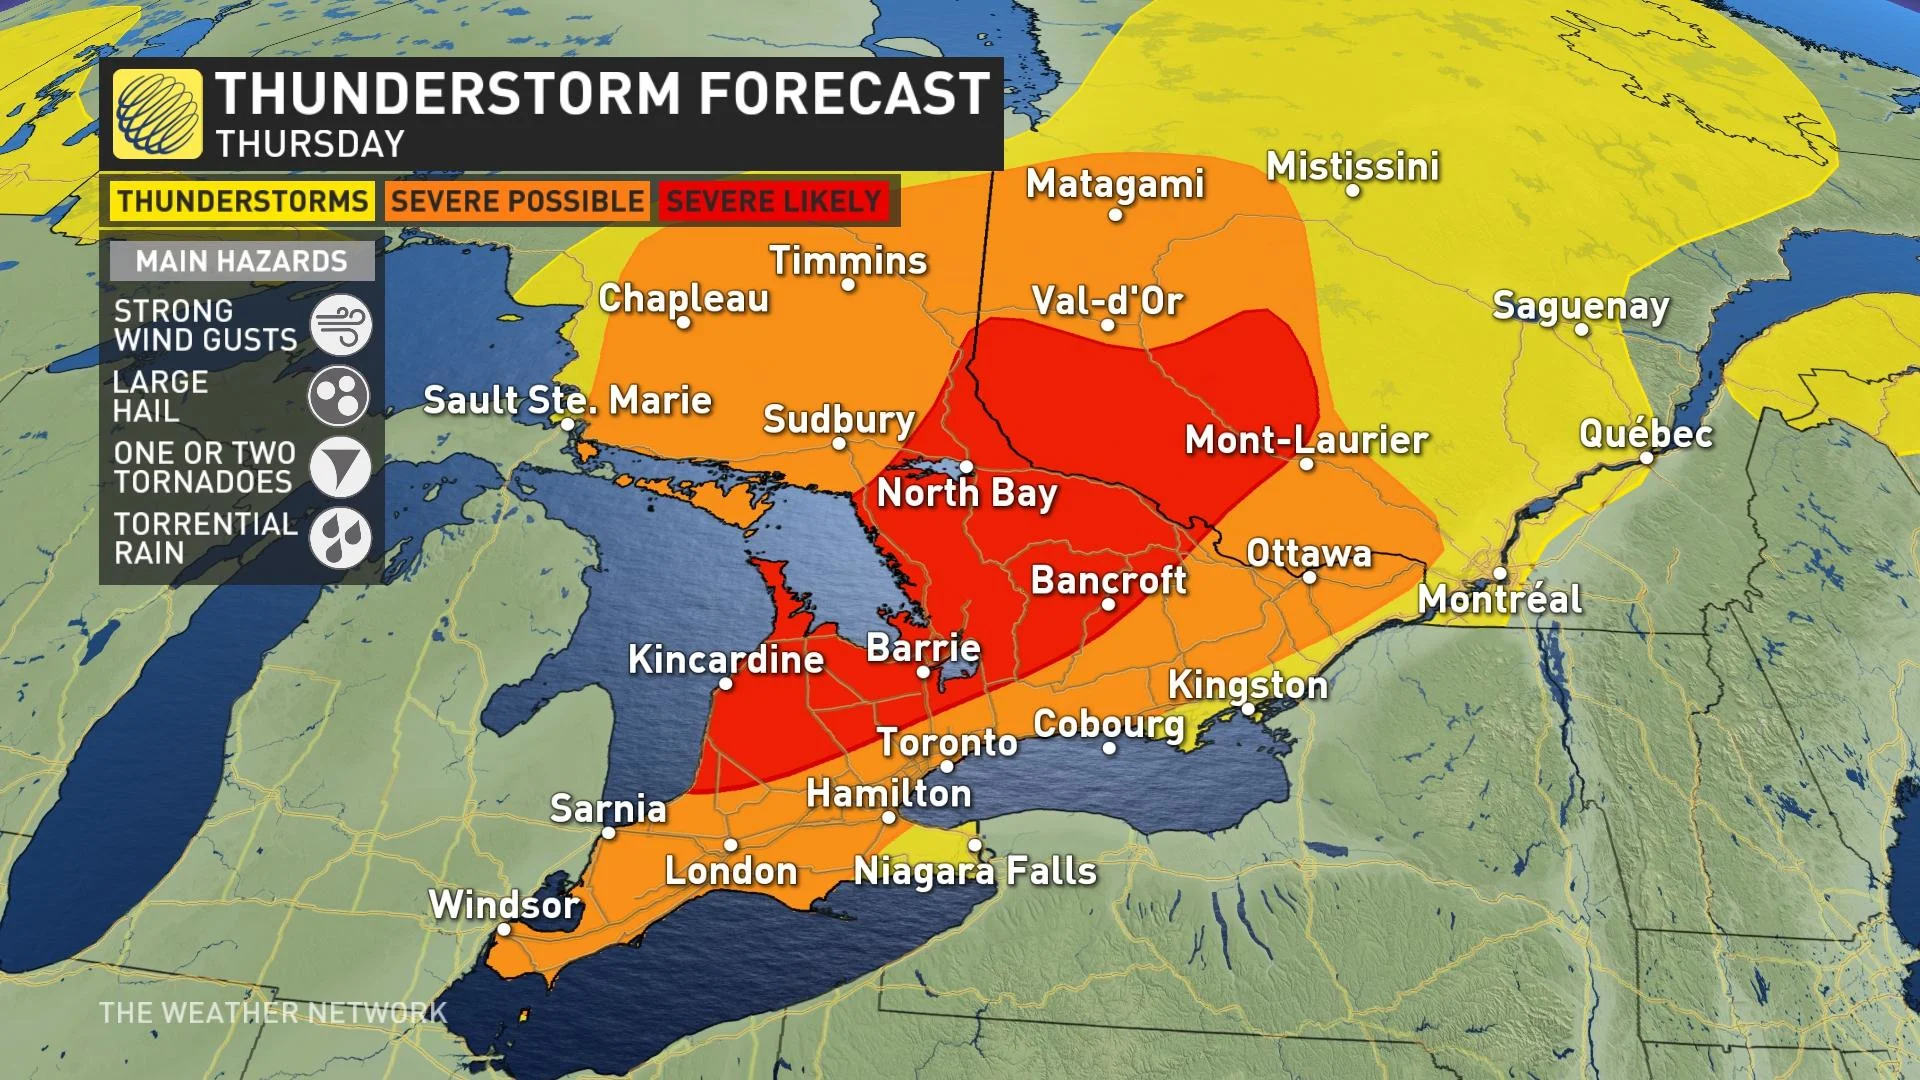 Baron - Southern Ontario thunderstorm risk - June12